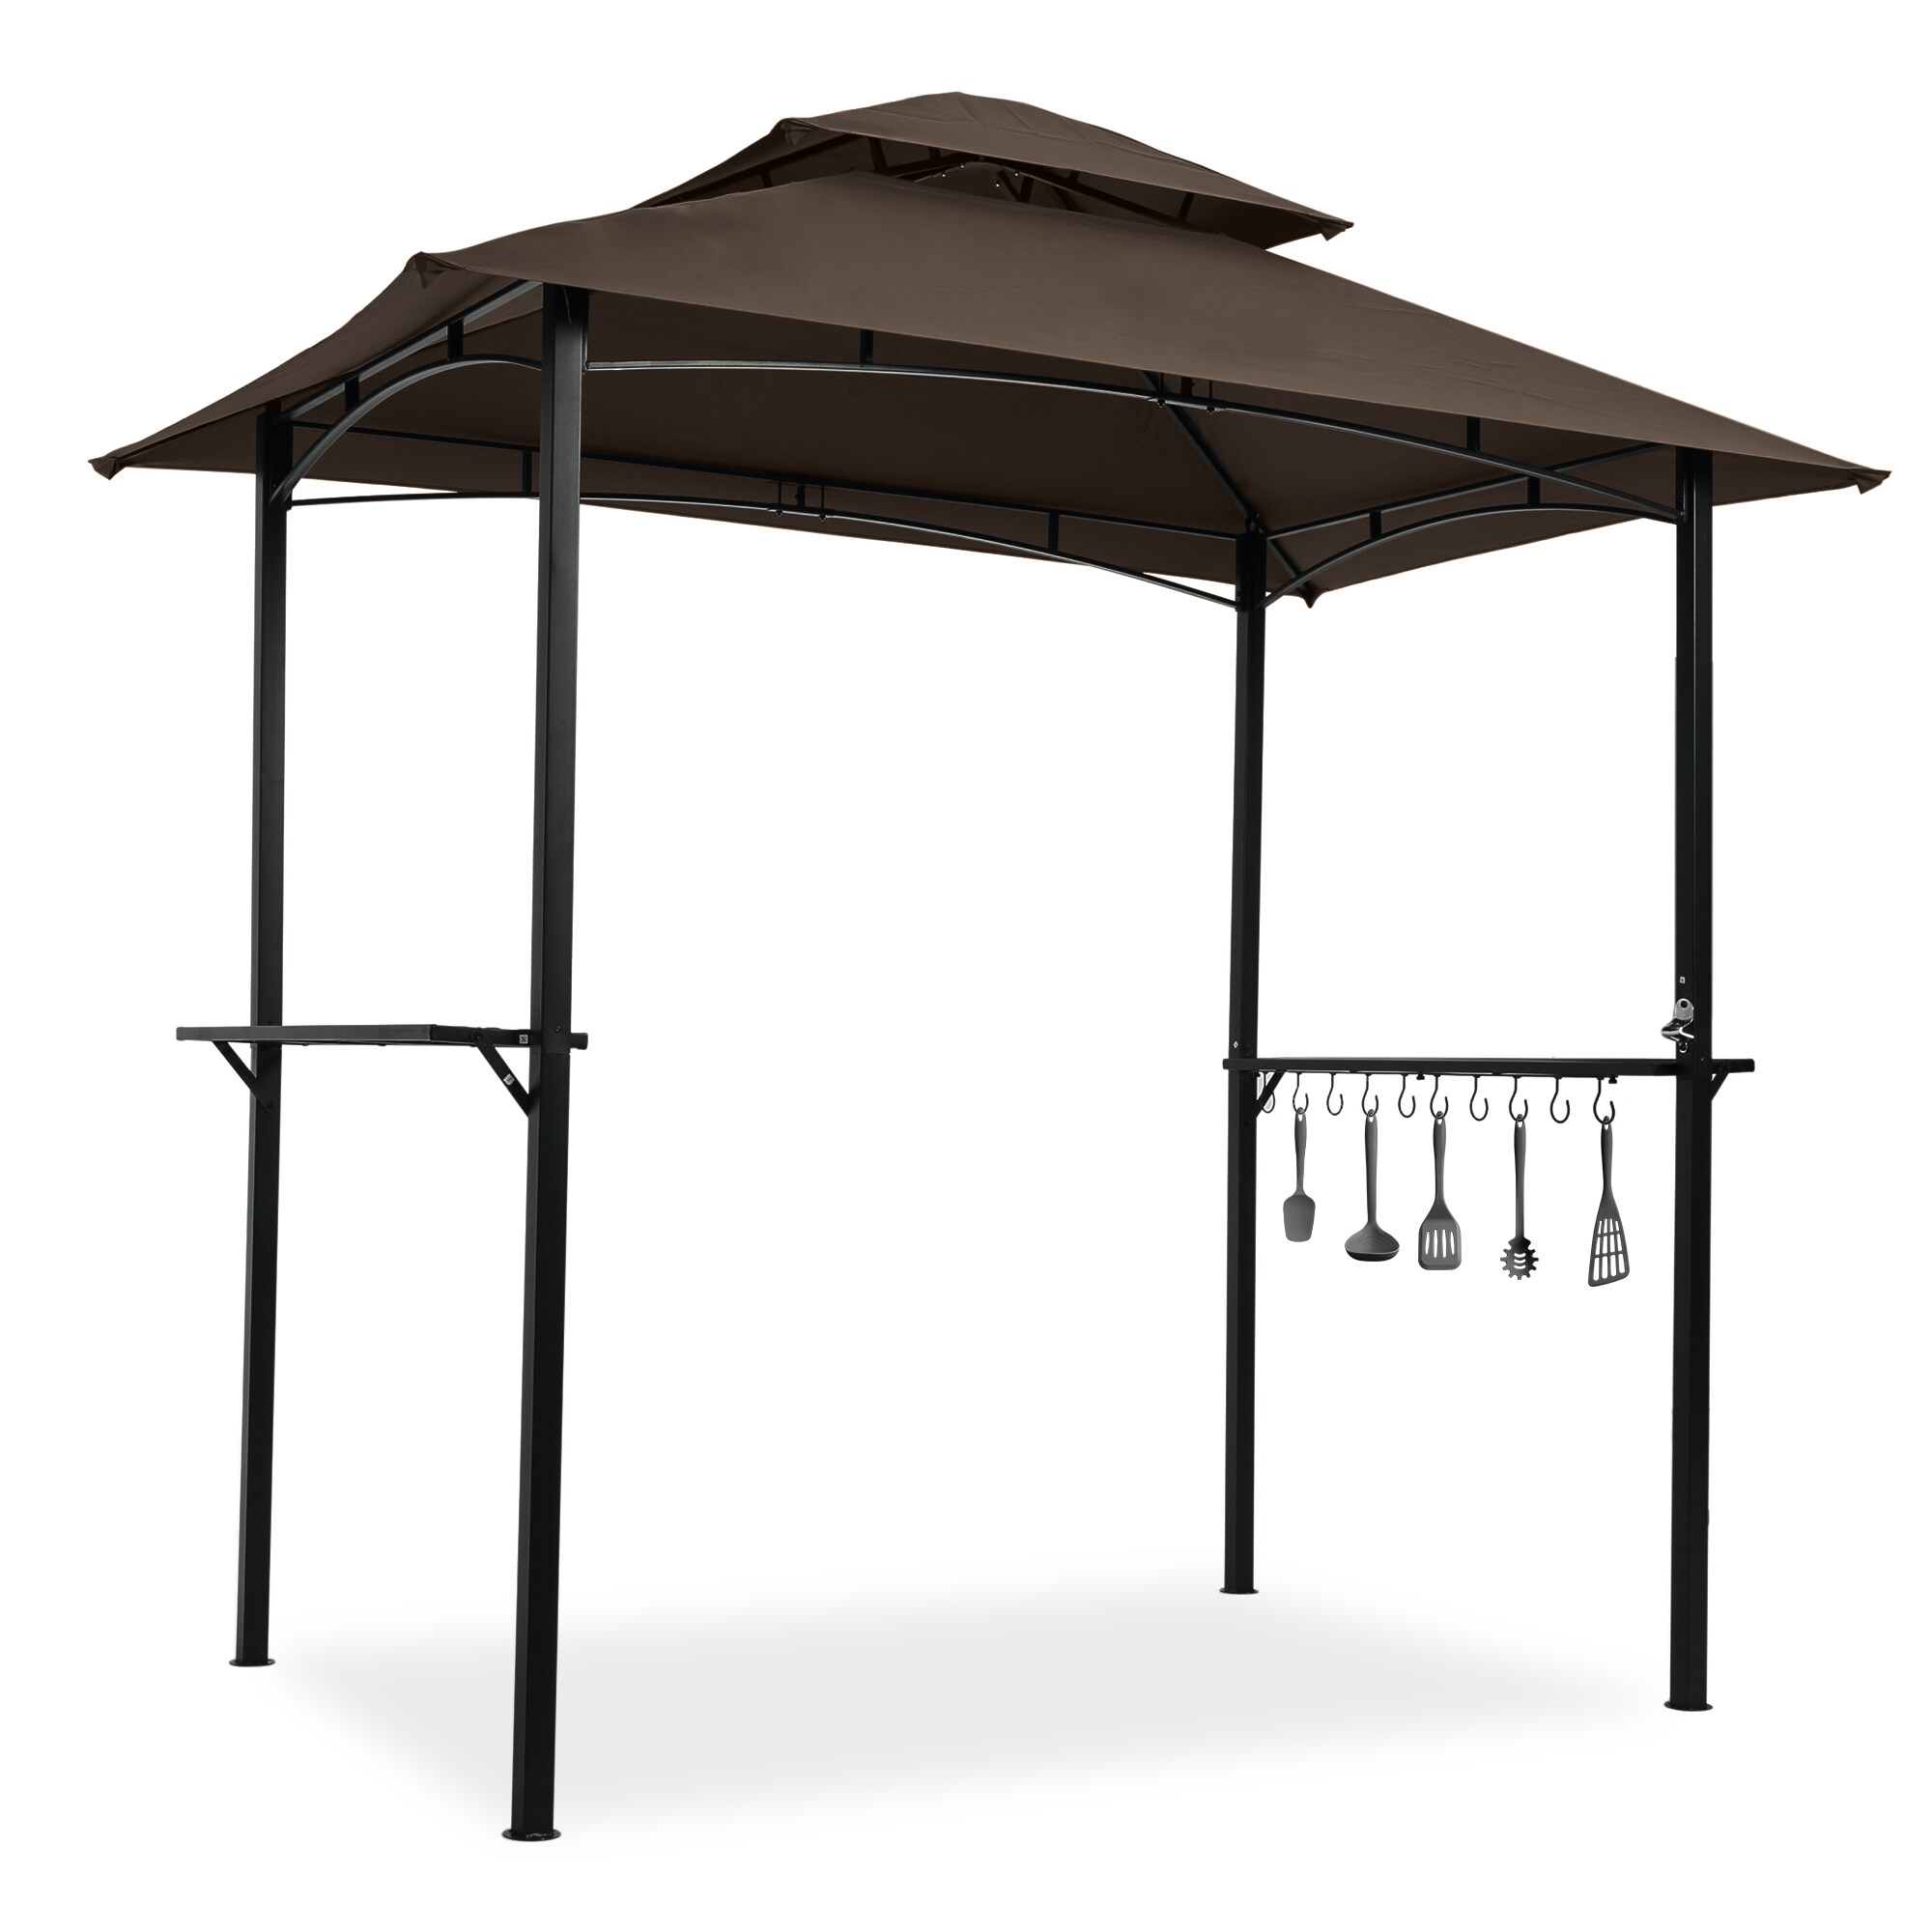 CASAINC 8-ft x 5-ft Pop-up folding tent Brown Metal Square Grill Gazebo the department at Lowes.com